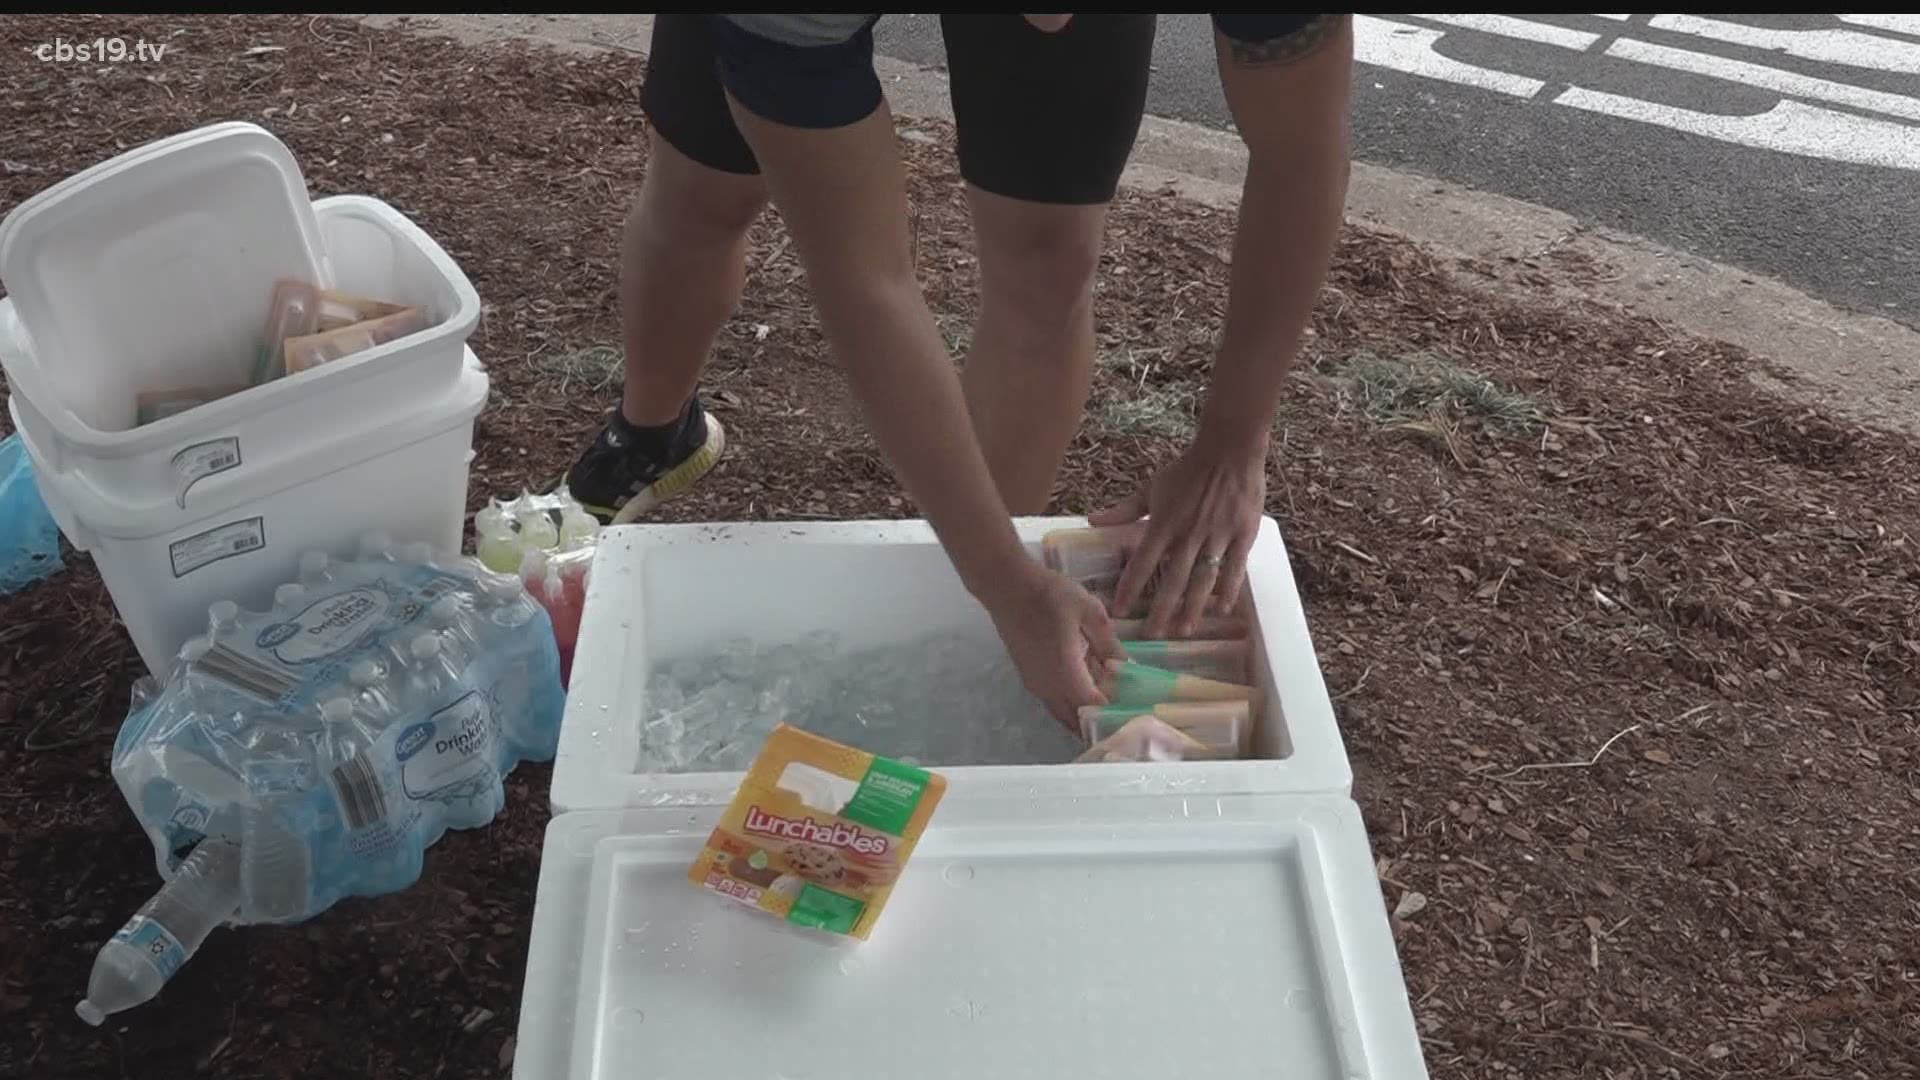 Fuzzy's taco shop on Troup highway started a 'pay it forward' movement by placing coolers full of free food and water across Tyler but some coolers are now missing.